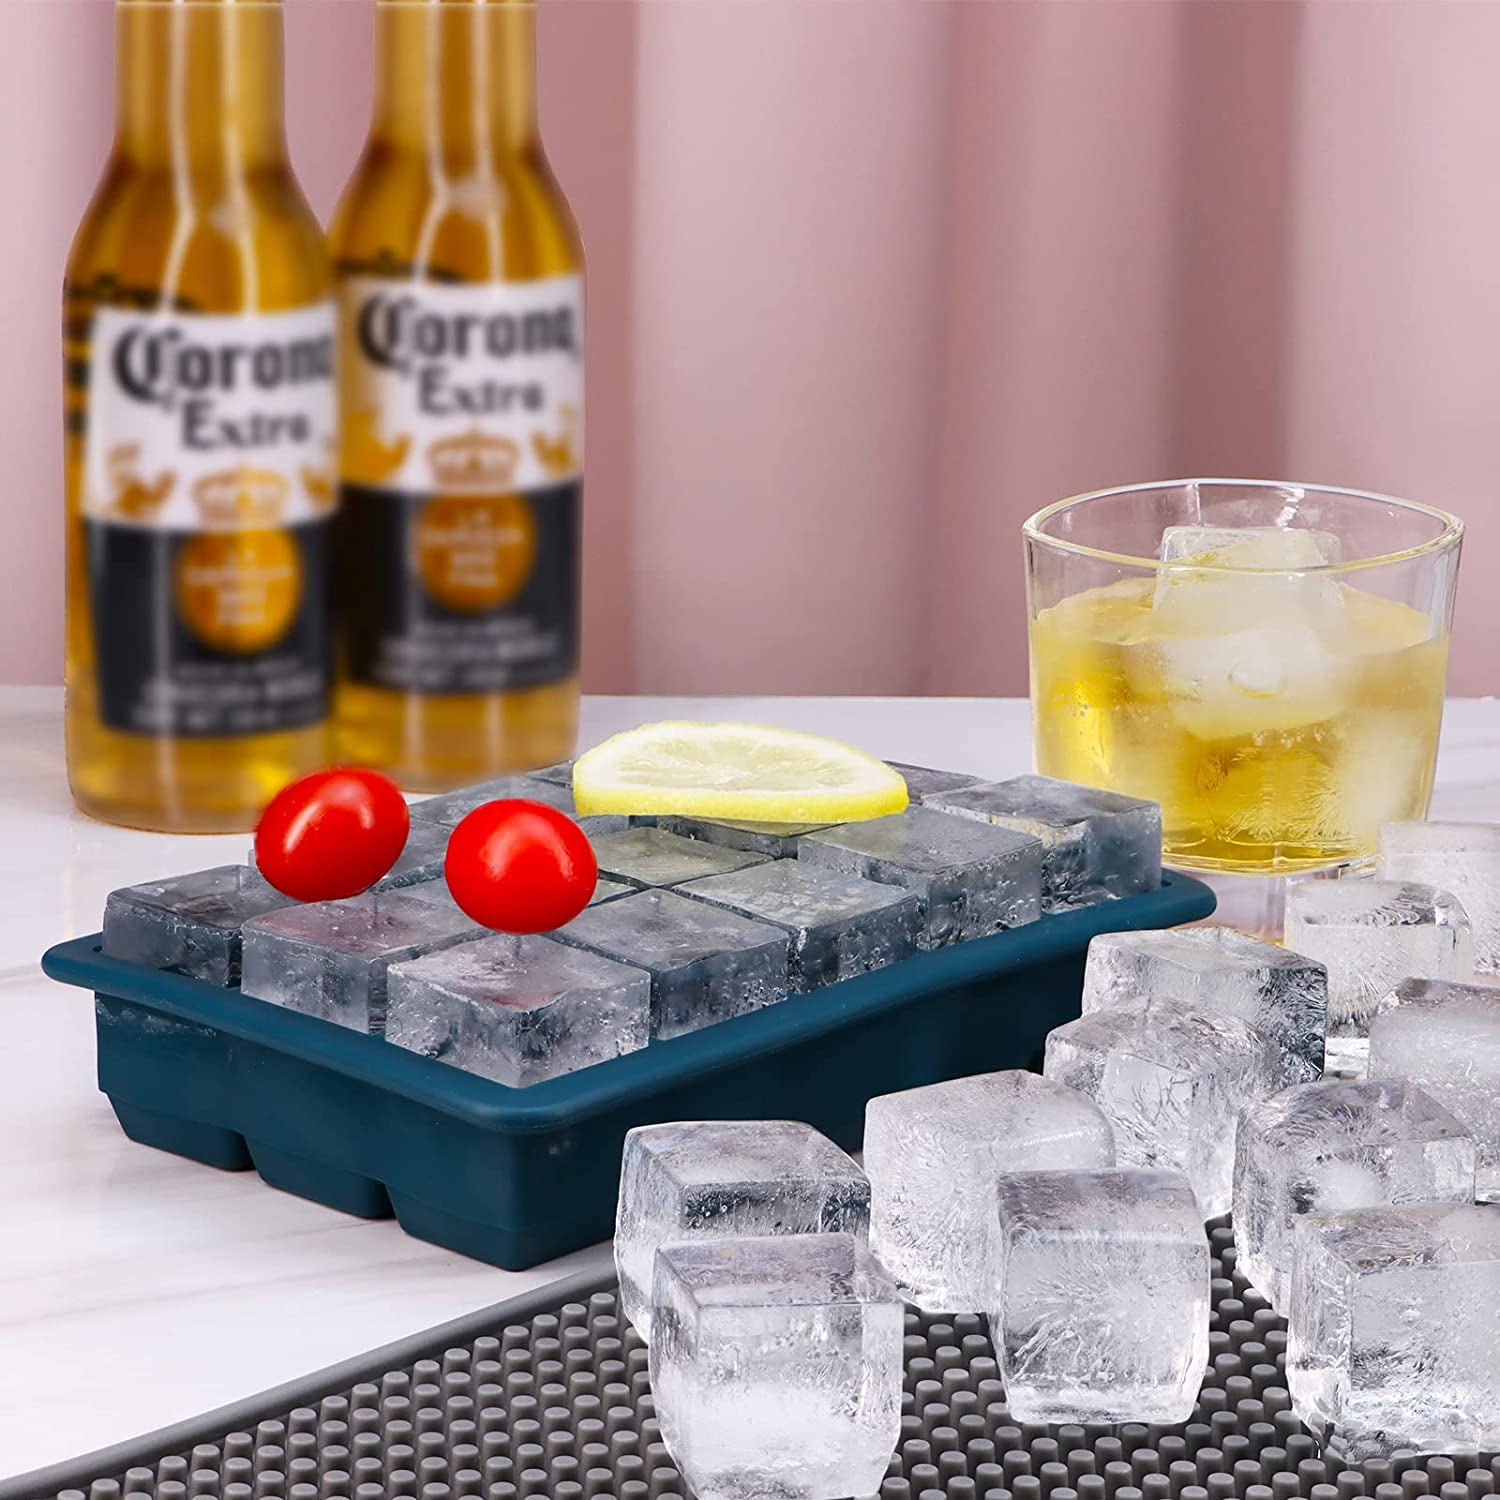 15x1 Ice Cube Mould